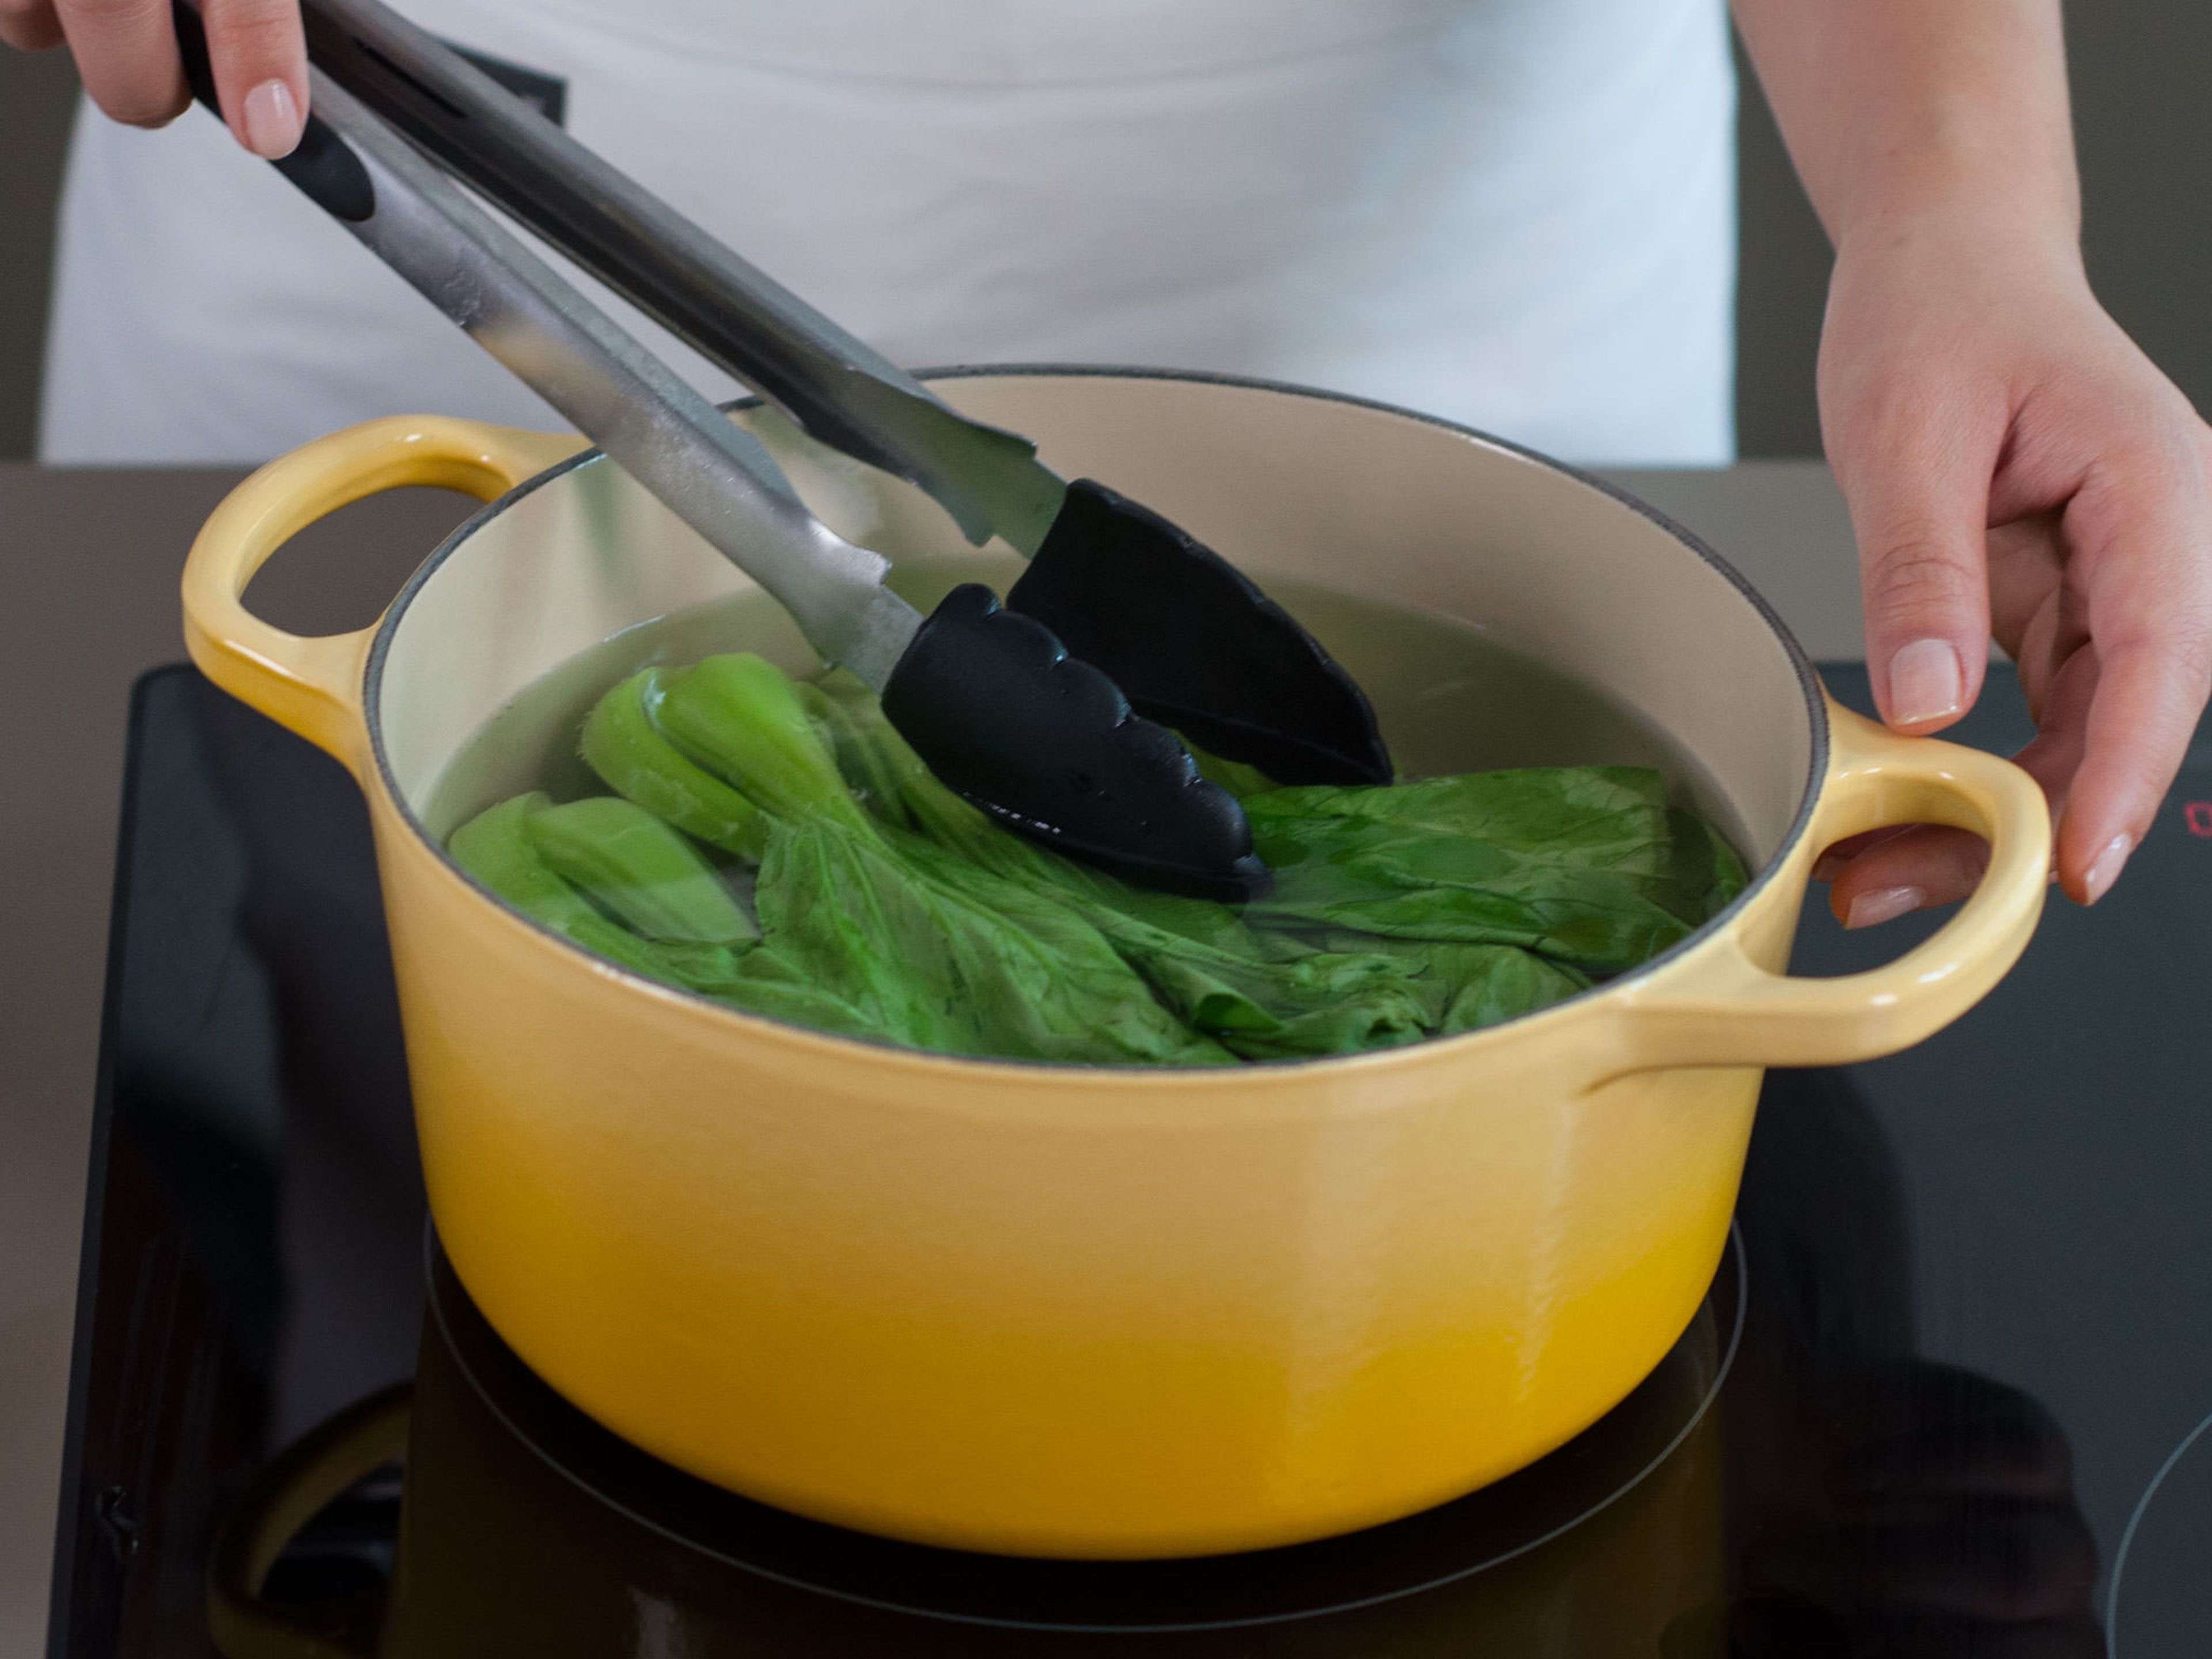 Bring a large saucepan of water with oil and salt to a boil. Dip the roots of the bok choy into the water for approx. 20 sec., then immerse all of it for approx. 1 min. Transfer to an ice bath to stop cooking process.